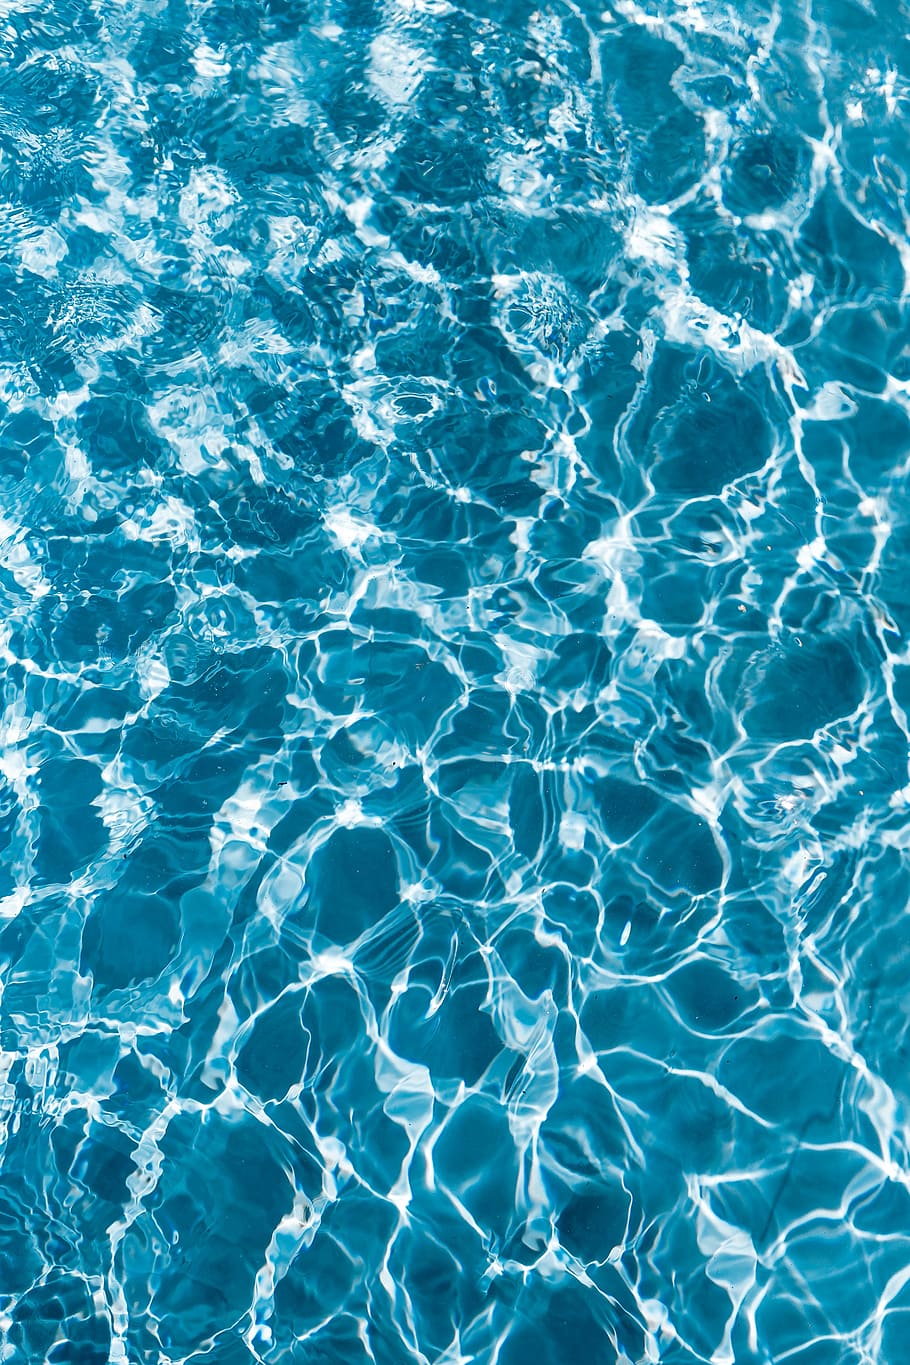 Summer Waves Pools, blue, turquoise colored, no people, full frame Free HD Wallpaper